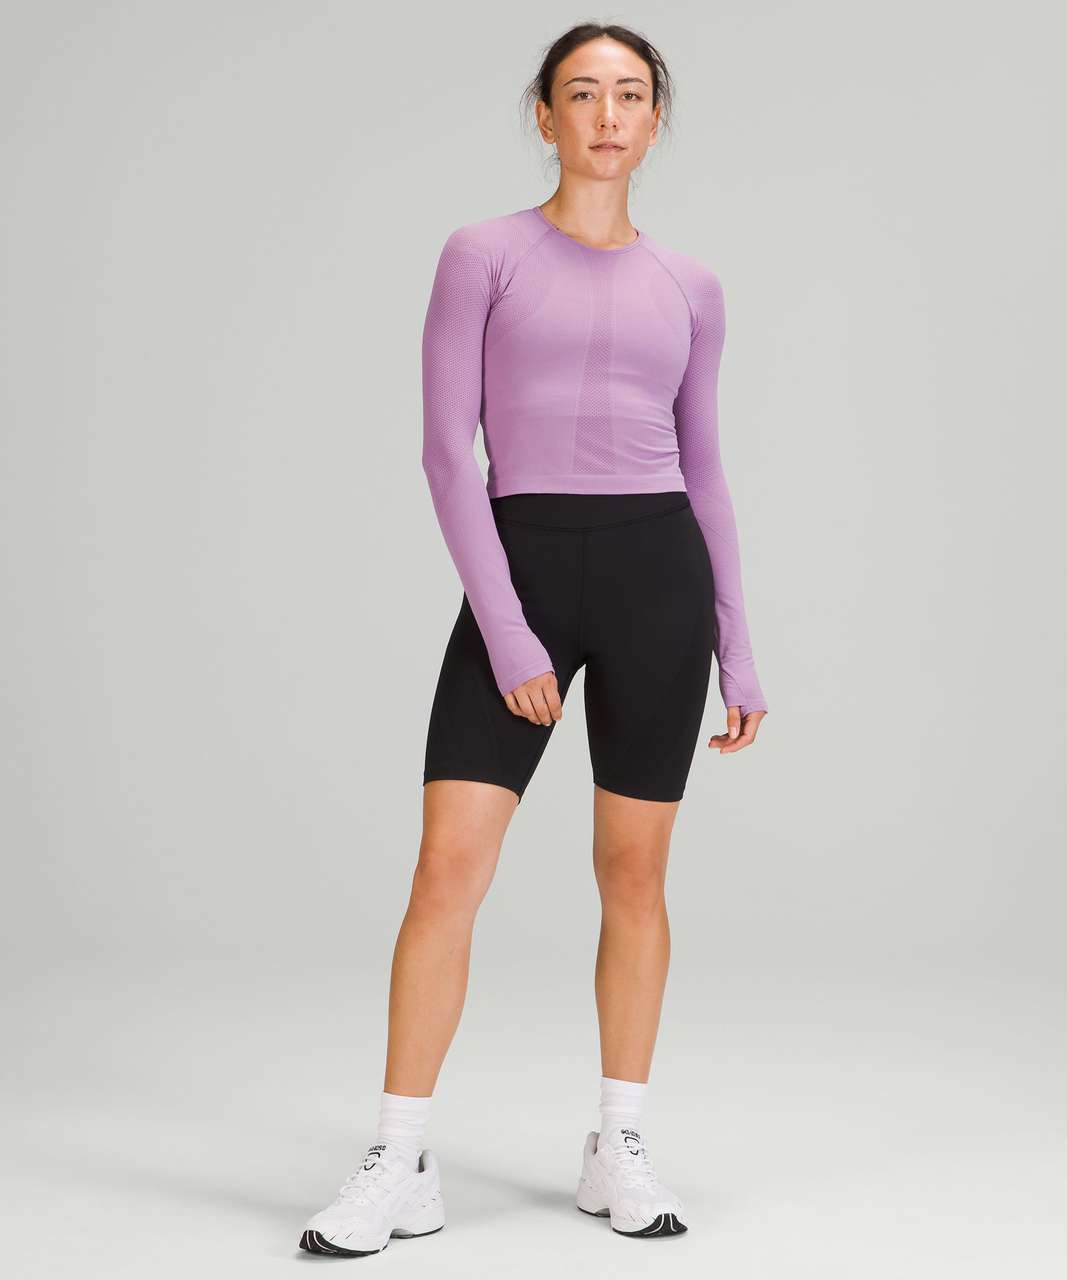 Lululemon For the Chill of it Long Sleeve - Wisteria Purple